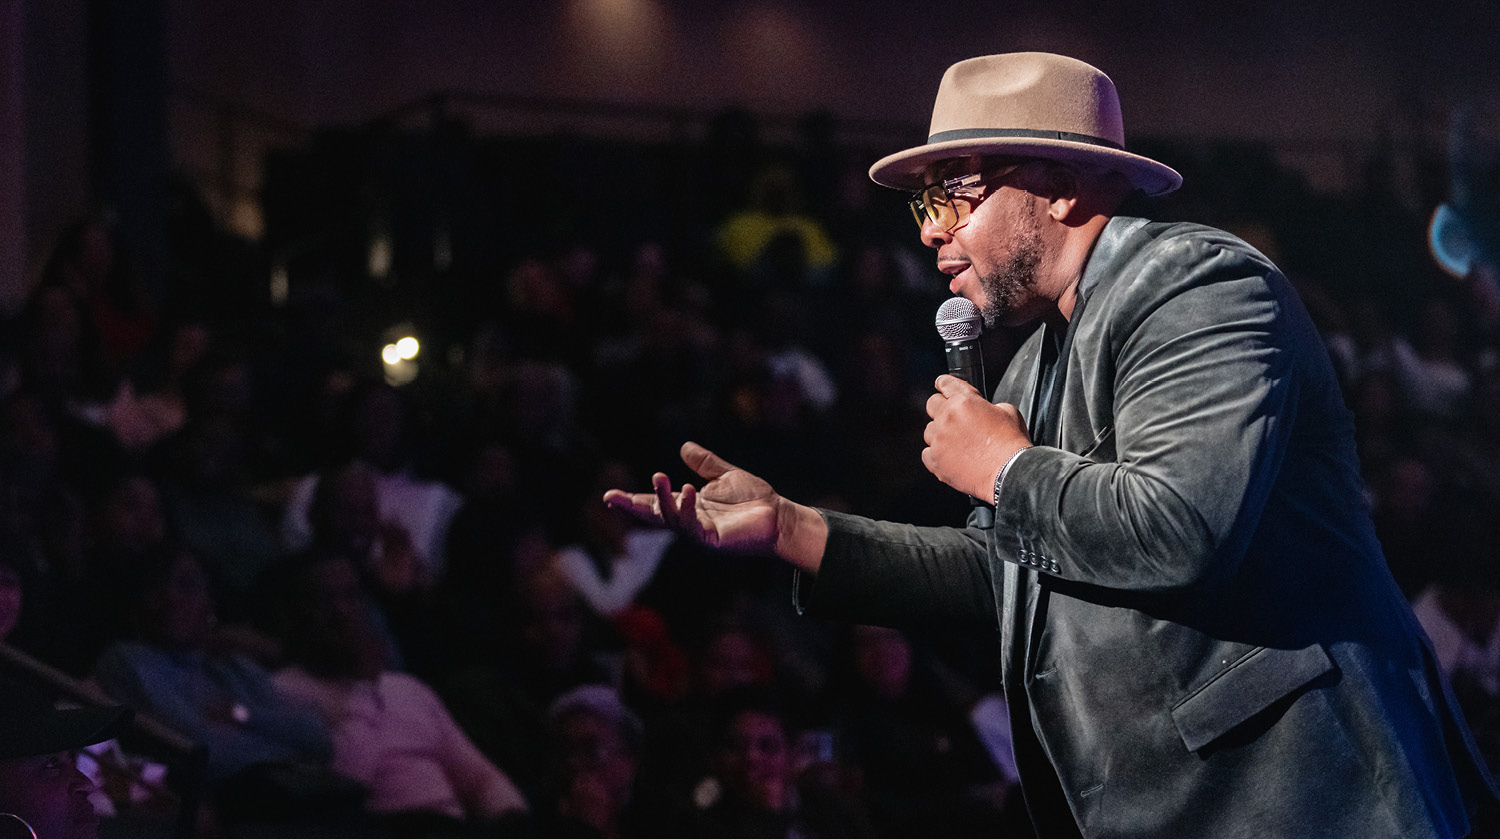 Image of comedian and curator Jay Martin leans toward the audience with a hand outstretched, while holding a microphone up to his mouth as he says something to the crowd. He has deep skin and dark hair and some facial hair. He’s wearing a black suit and brown brimmed hat with glasses. The large audience is blurry in the background. 